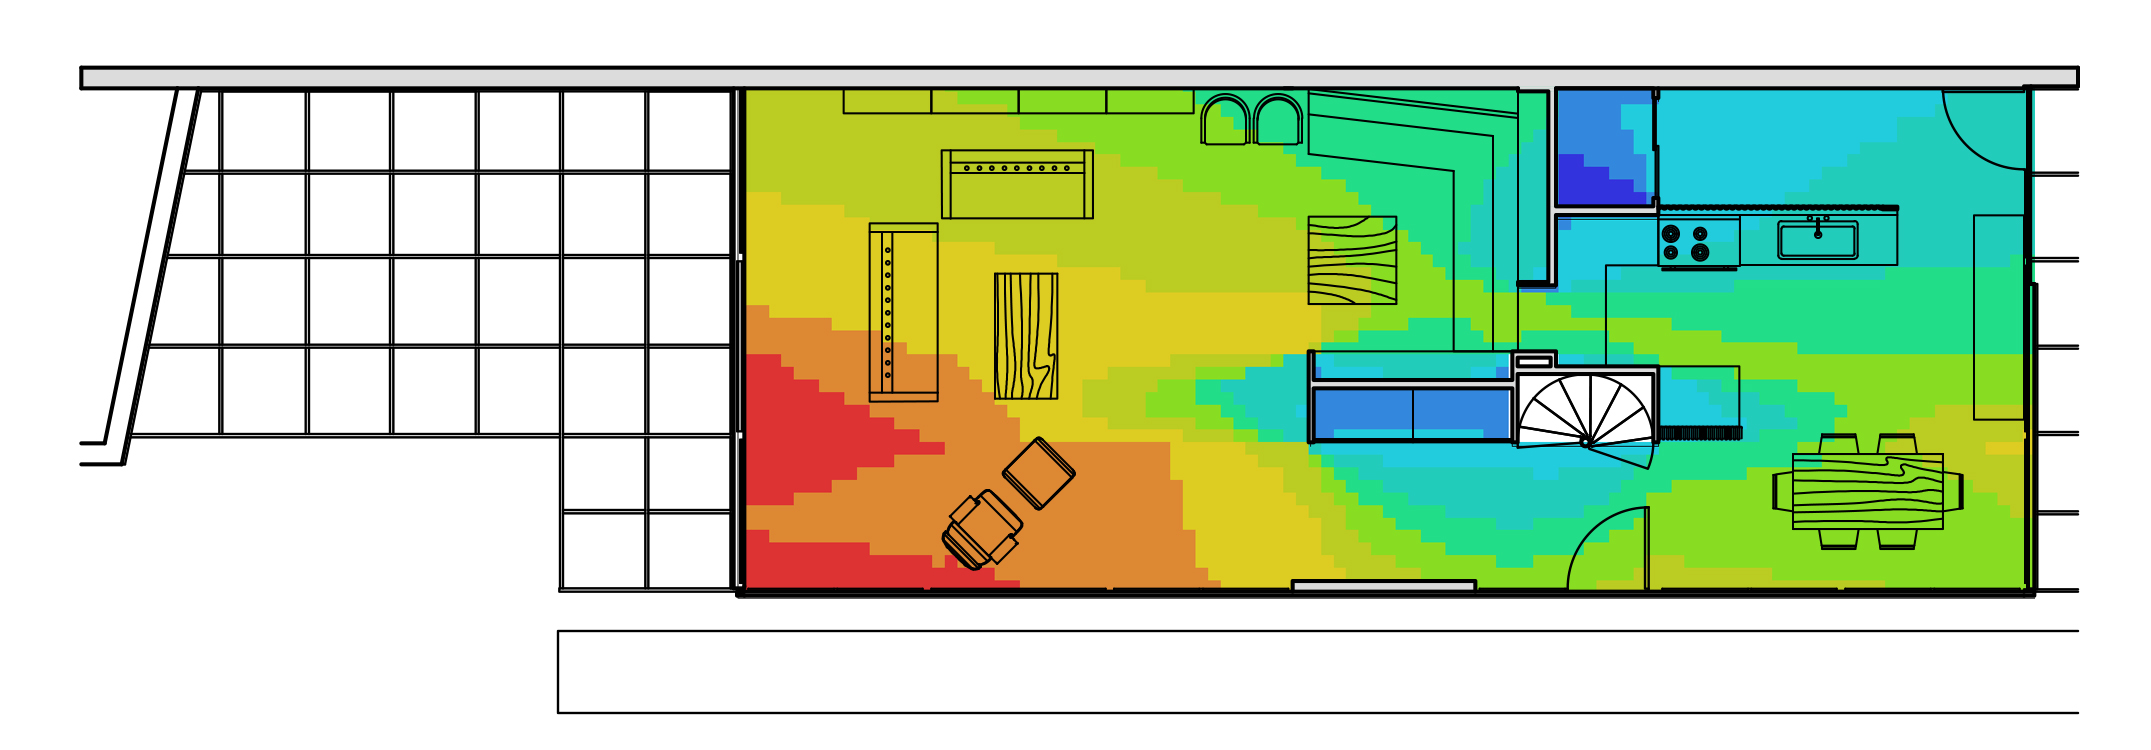 It is the photoshopped image for Eames house first floor with visibility diagram from depthmapX